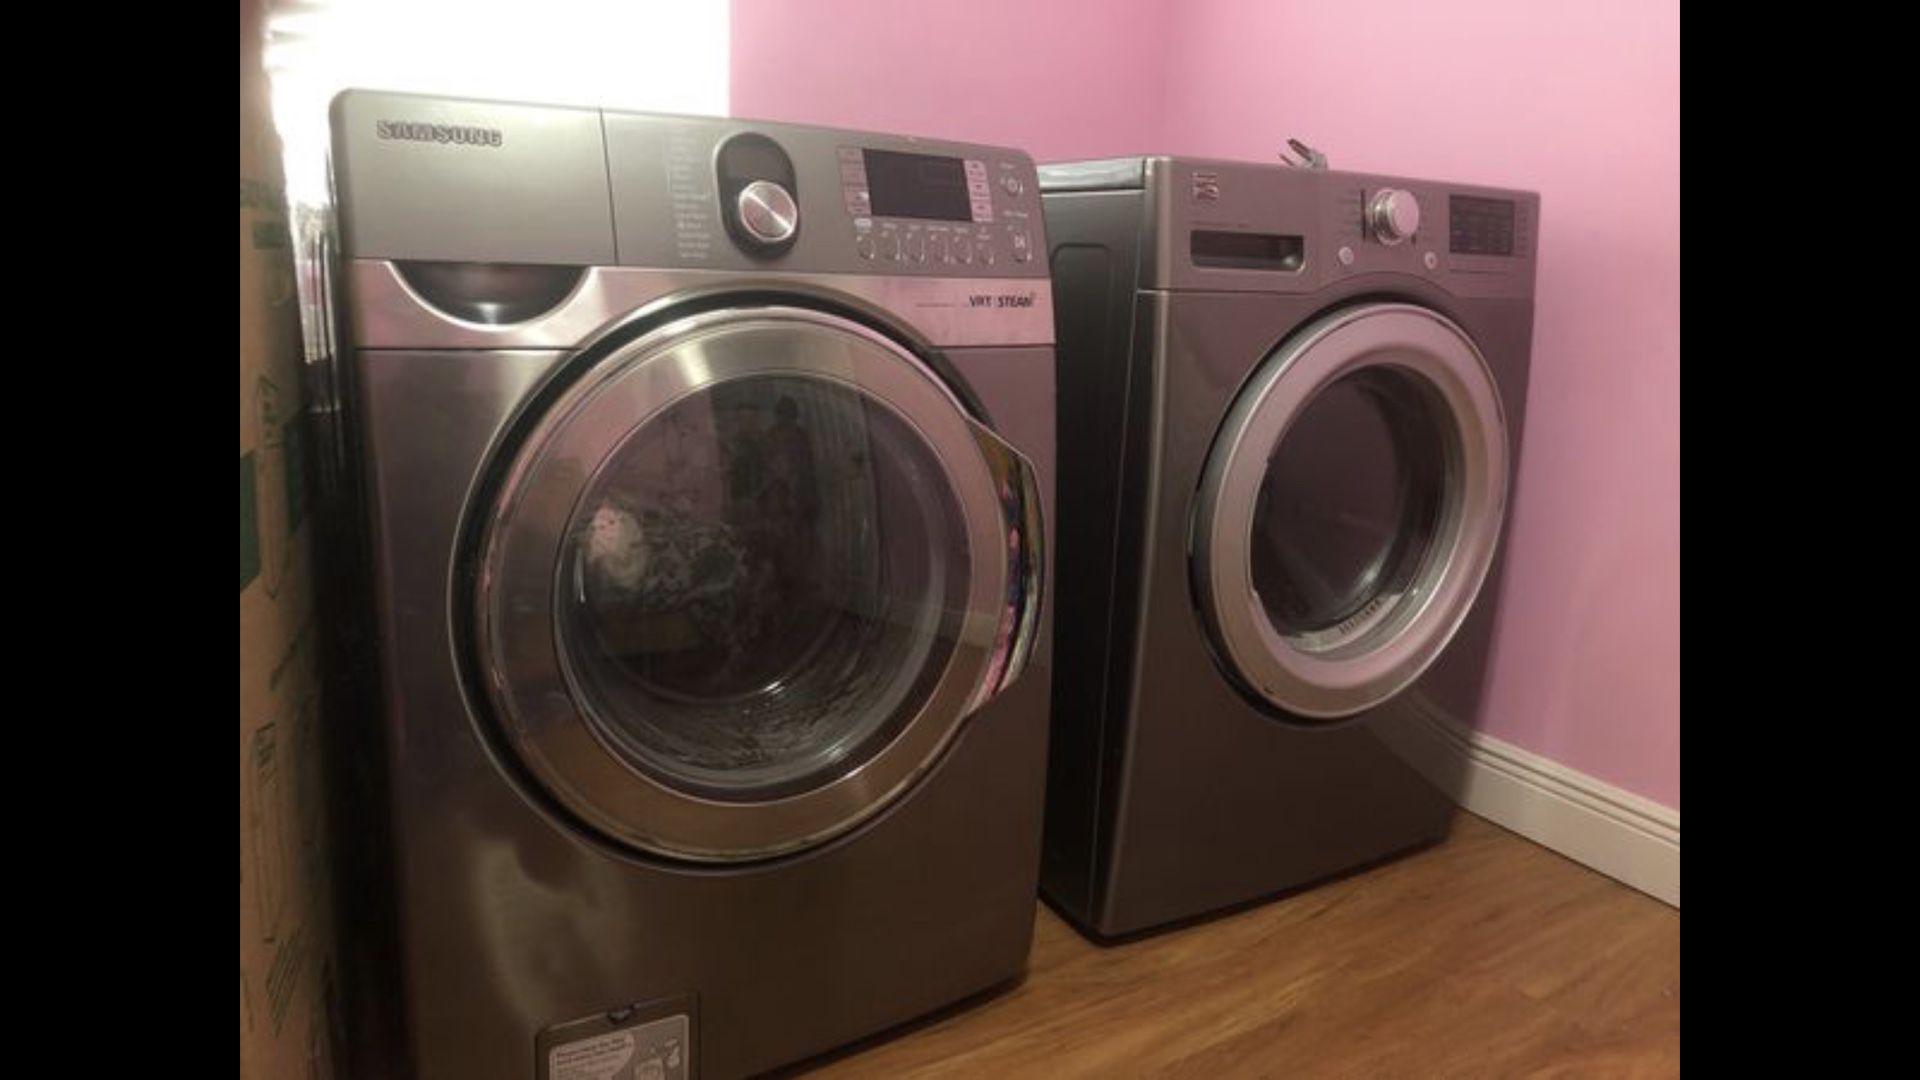 Samsung washer Kenmore Dryer both color Gray